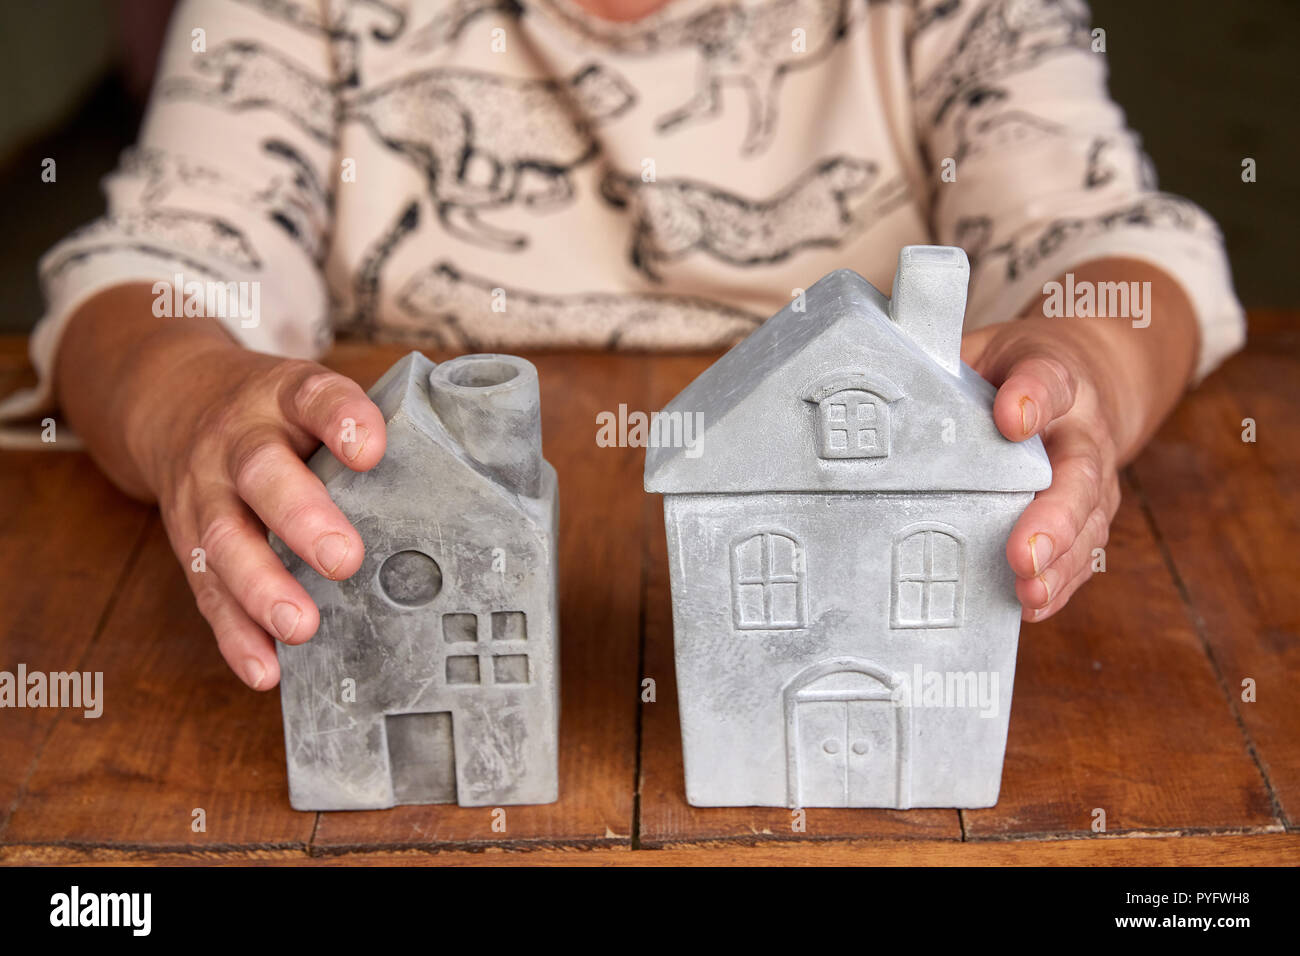 Saving for buy a new house or real estate and loan for plan business investment in the future concept. Senior woman with house model at table Stock Photo